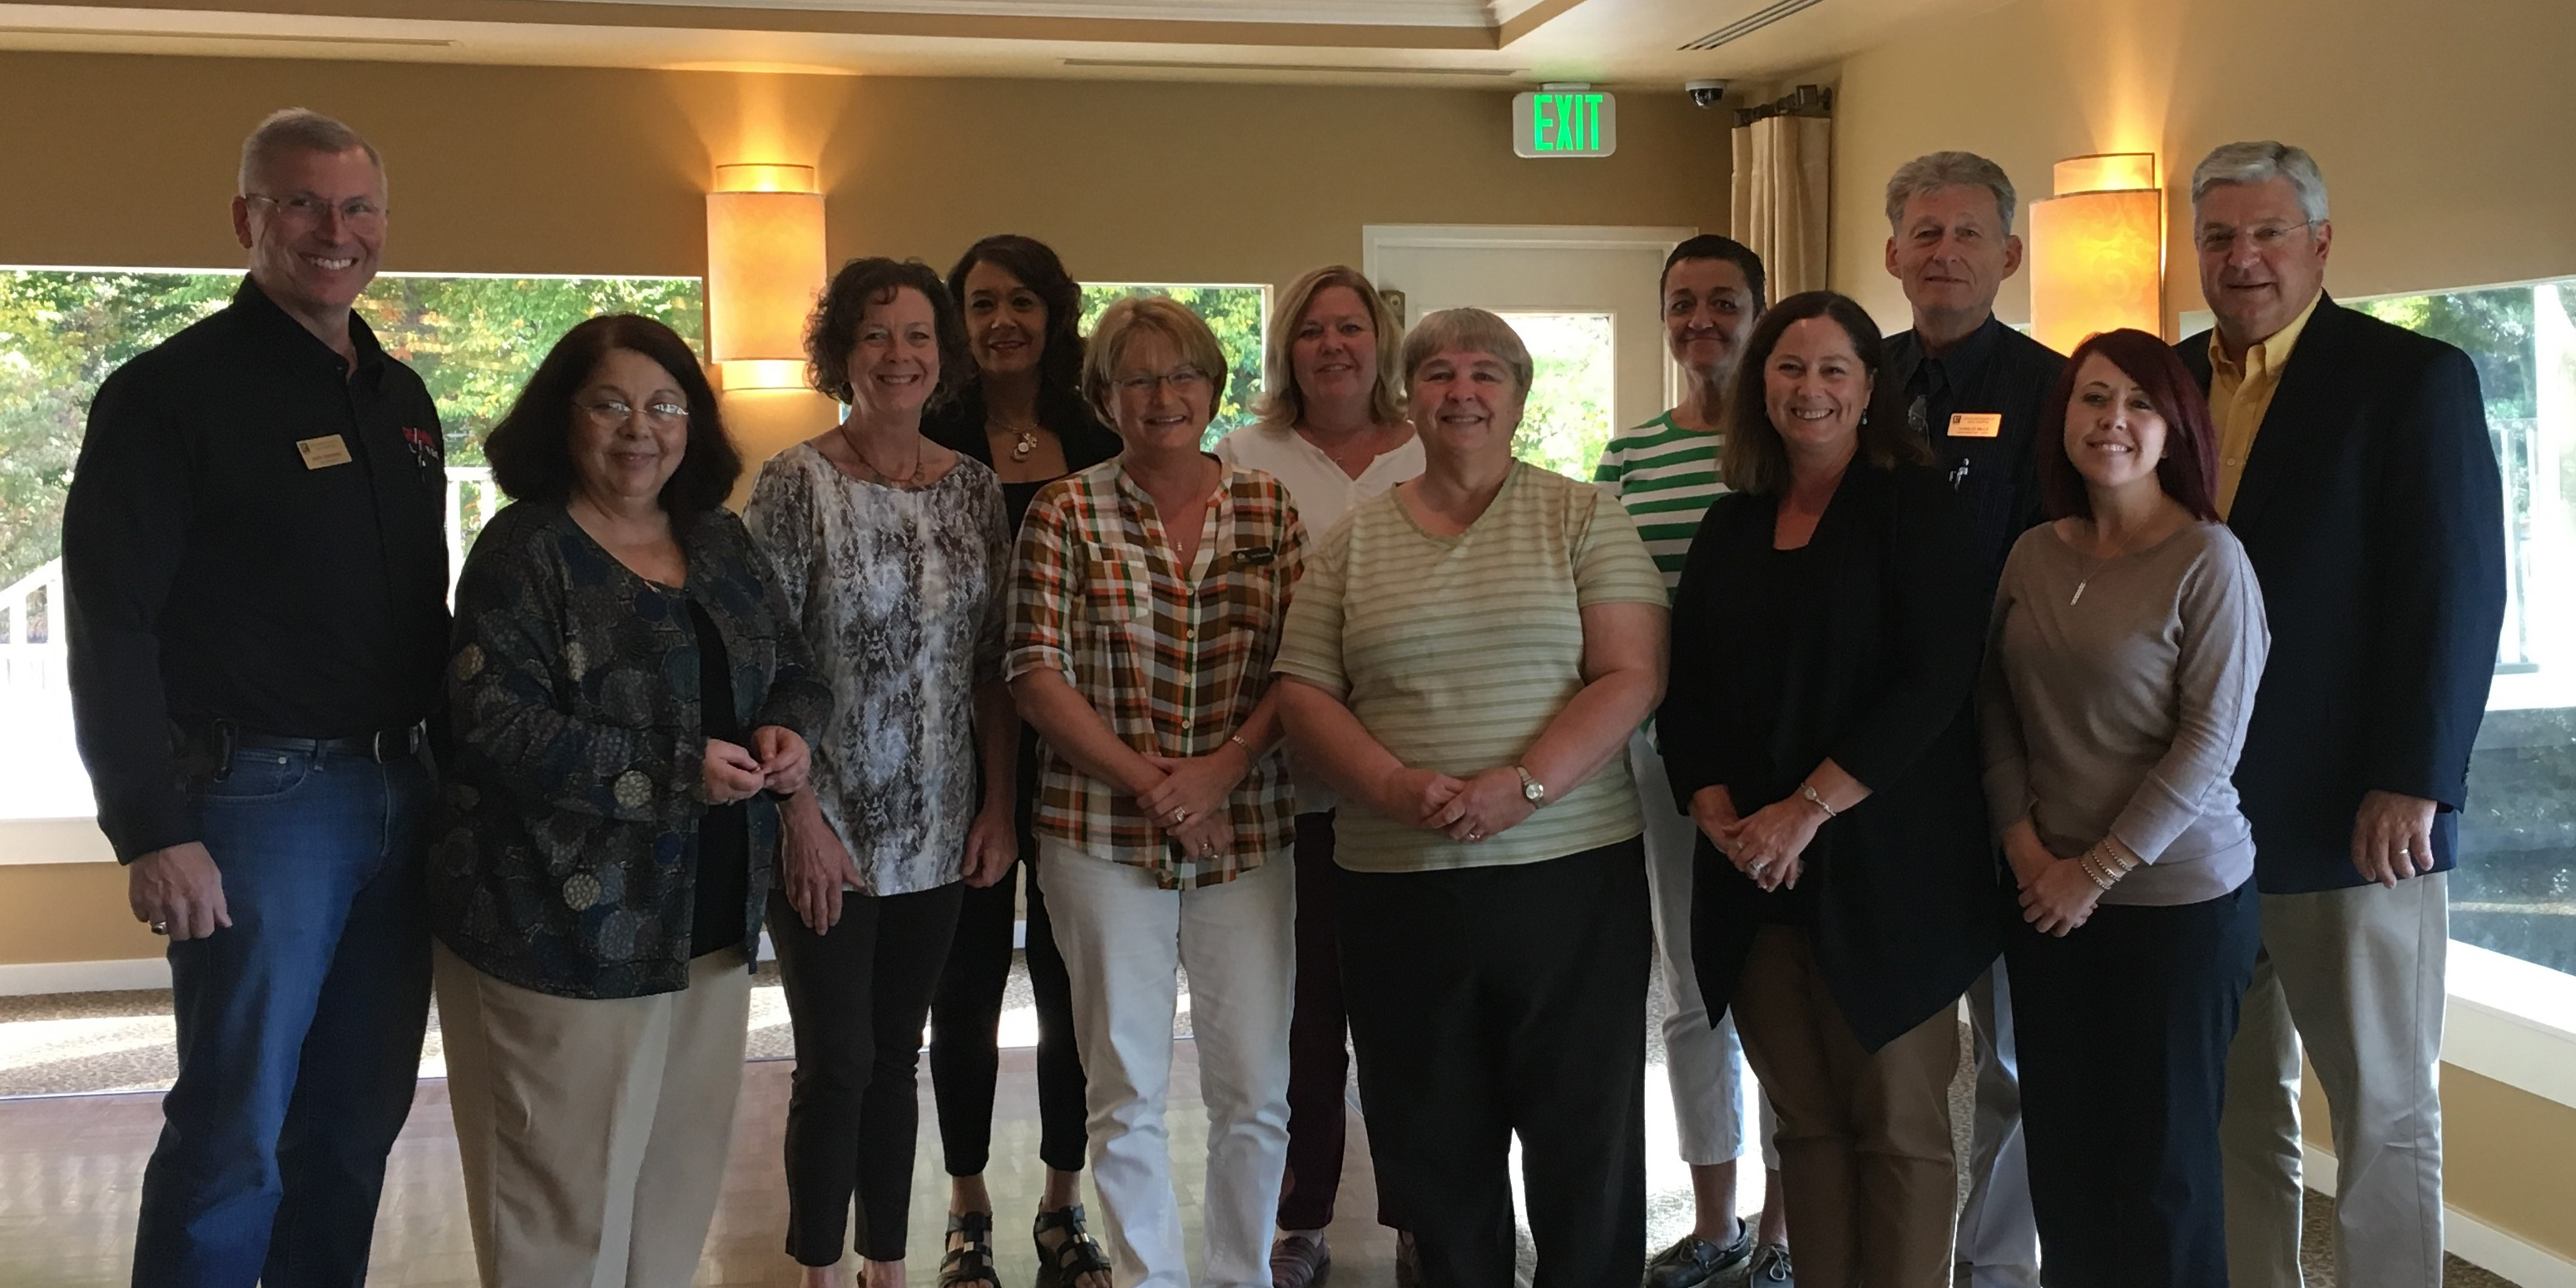 Pictured, from left, are Mark Skibowski, RE/MAX Lakes, Nicki Pawlicki, Todd Realty, Kim Hart, CBRWG, Joni Hire, CBRWG, Lori Rockwell, Rockwell Realty Team, Christie Brumfield, RE/MAX Results, Susan Woodward, Woodward Appraisal Services, Mary-Ellen Prickett, Prickett’s Properties, Linda Goshert, CBRWG, Charlie Mills, Homes, Land and Lakes Realty, Julie Hall, RE/MAX Lakes and Presenter, Warsaw Mayor Joseph Thallemer.